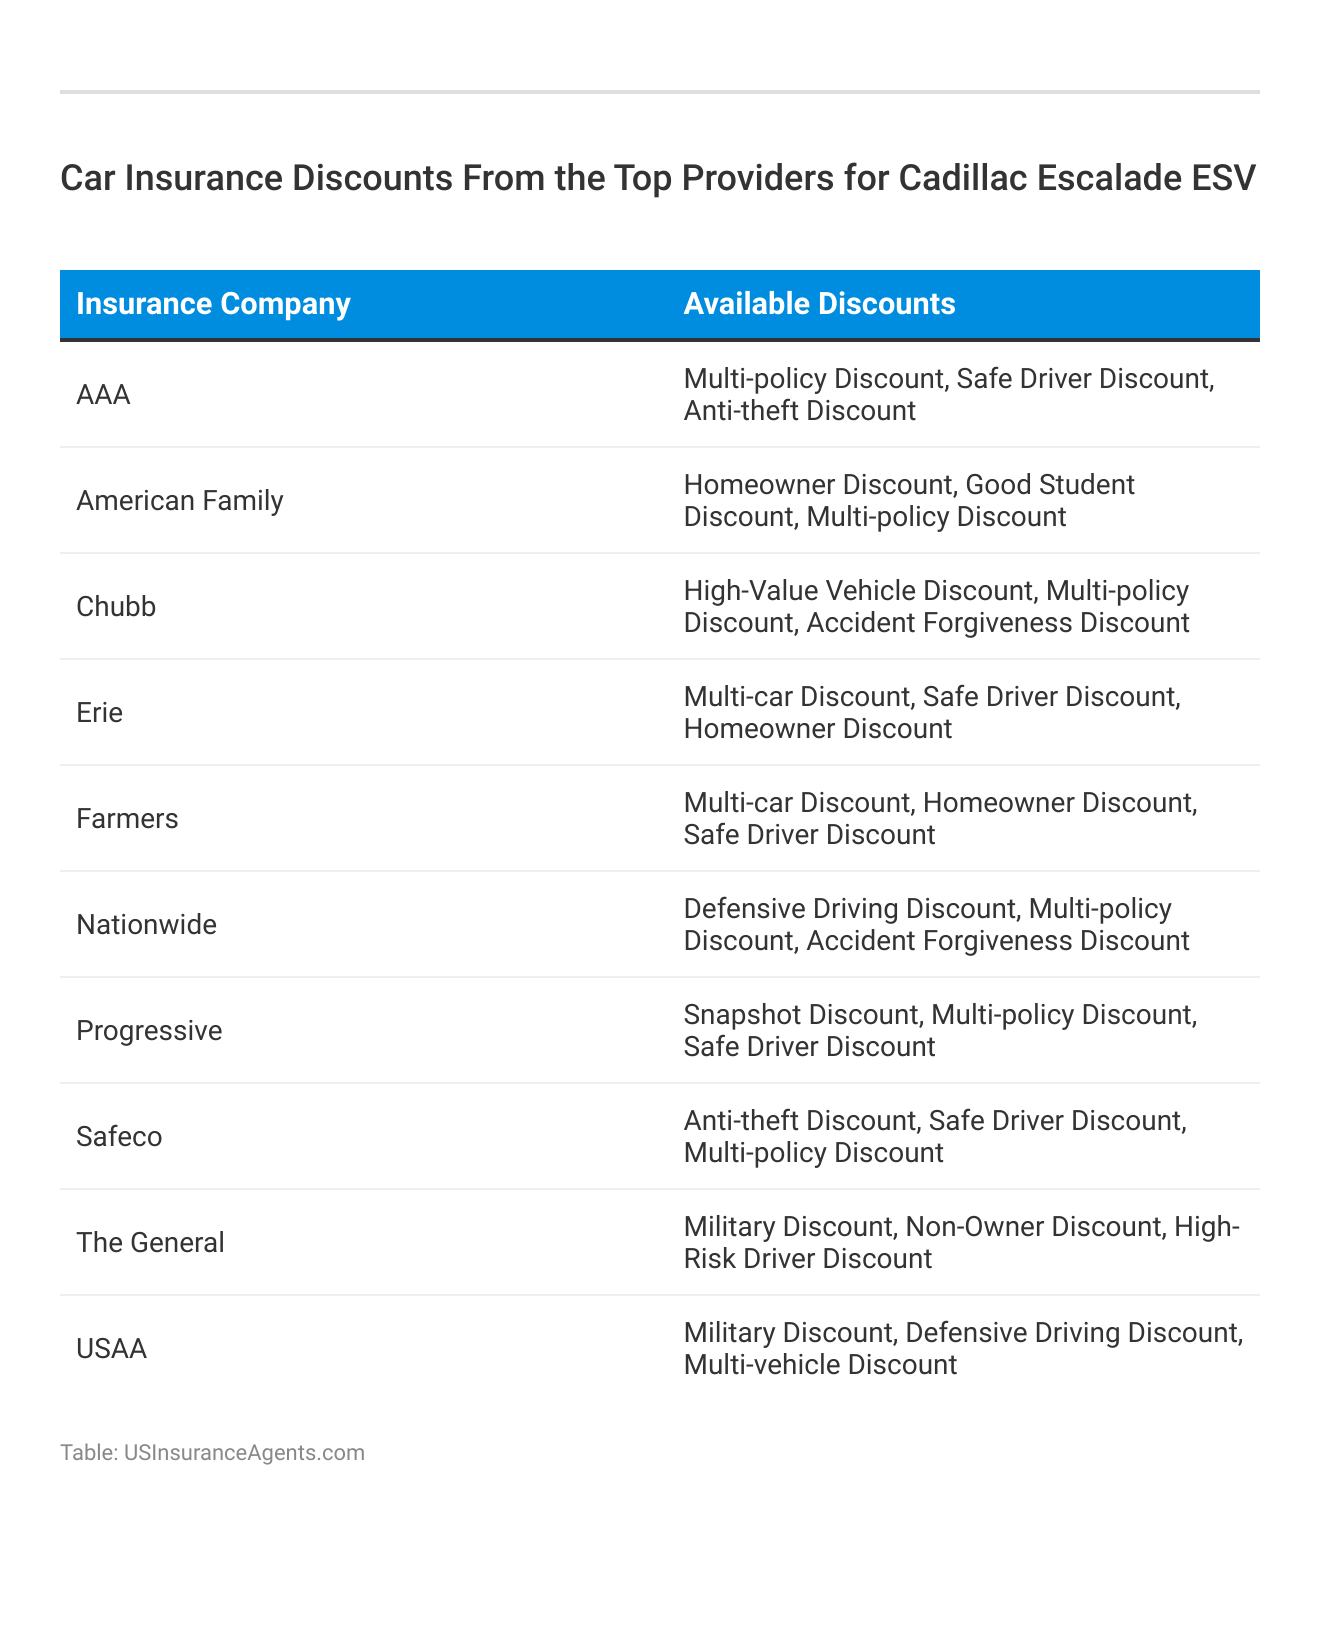 <h3>Car Insurance Discounts From the Top Providers for Cadillac Escalade ESV</h3>